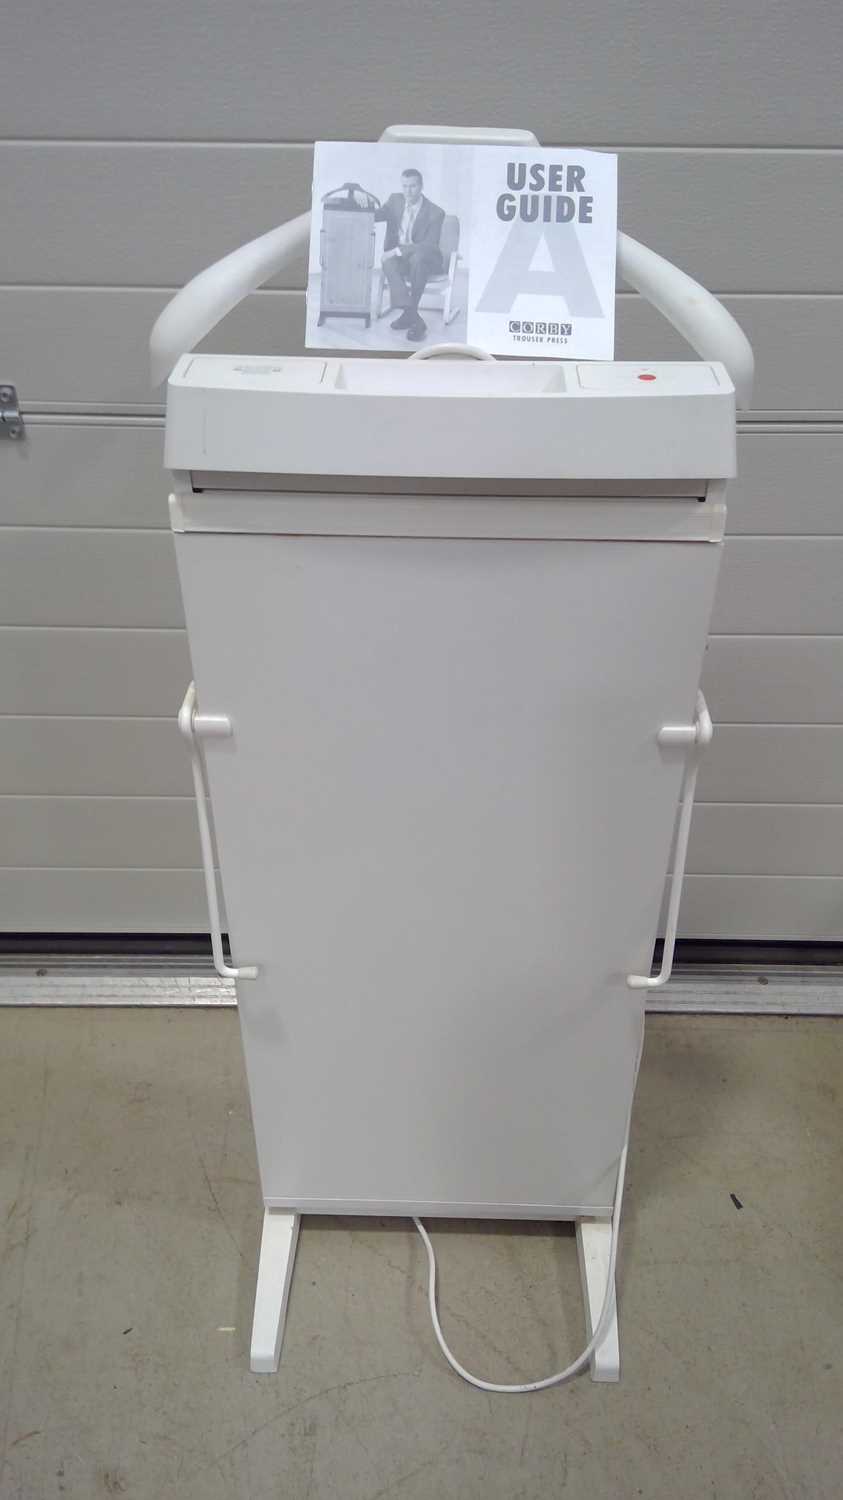 Corby Trouser Press for sale in Co Cork for 15 on DoneDeal